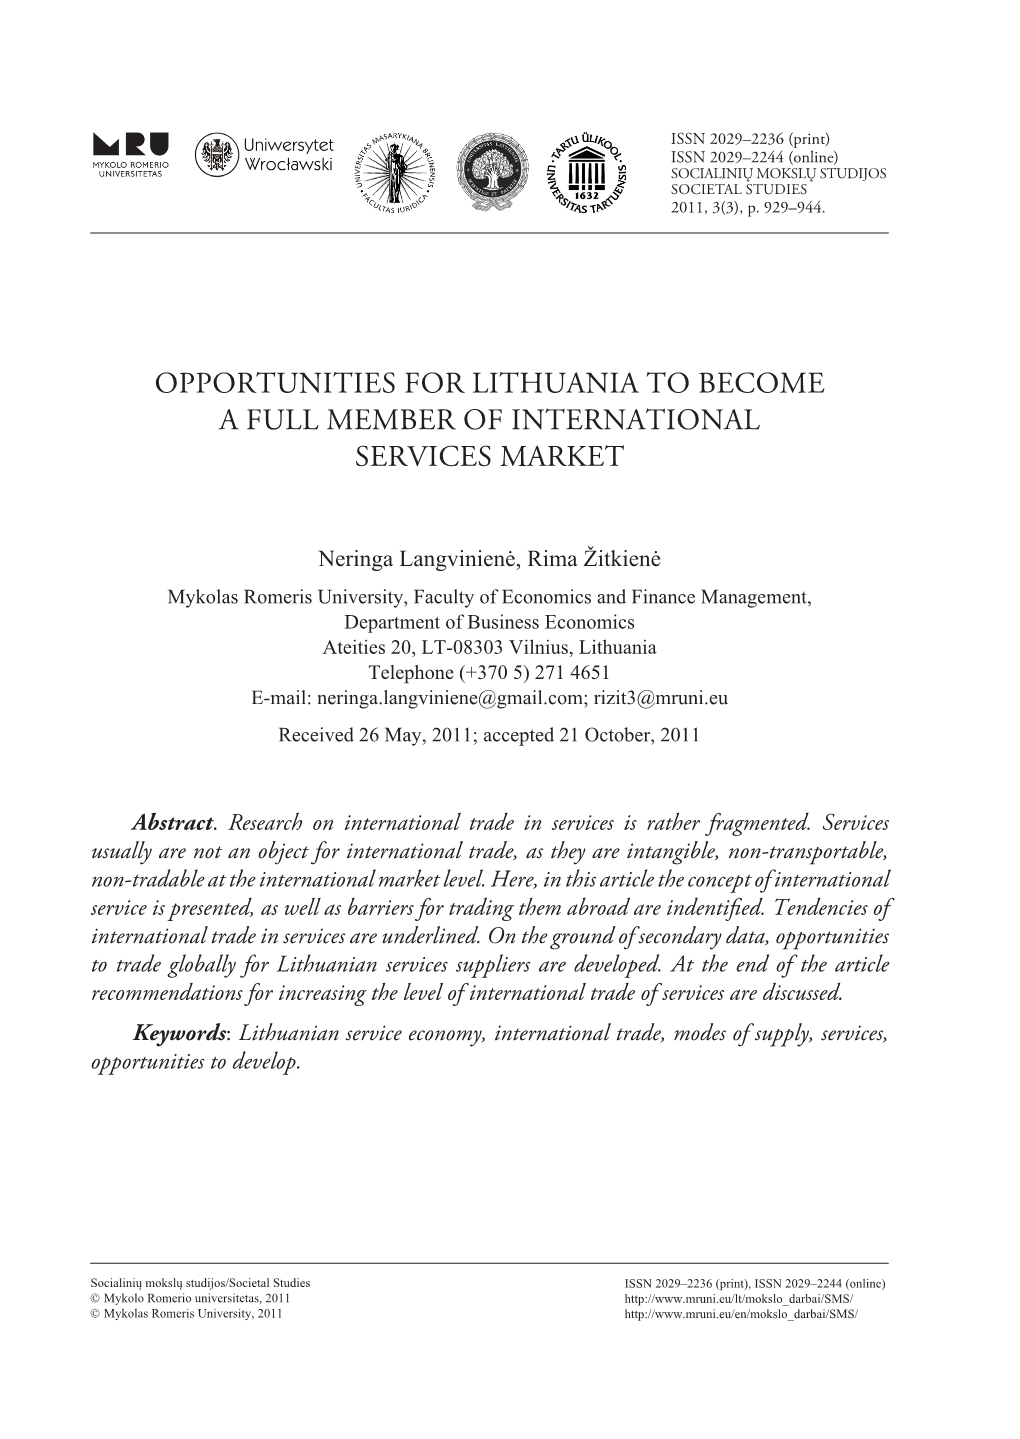 Opportunities for Lithuania to Become a Full Member of International Services Market